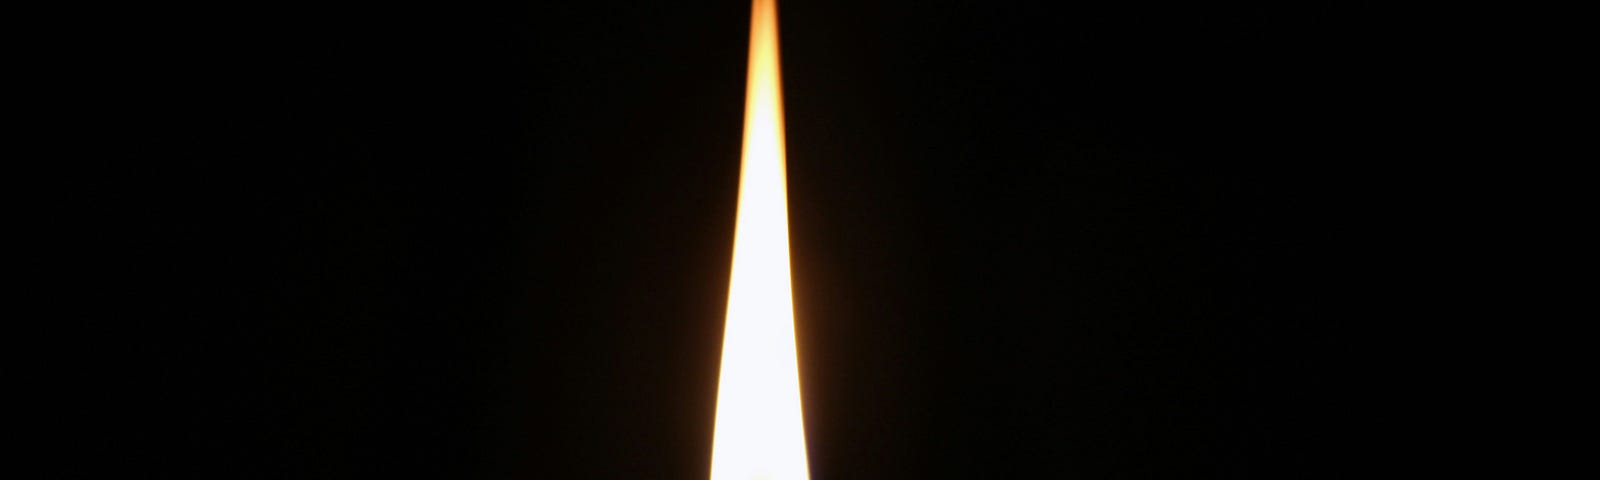 Image of a candle flame with a dark background.